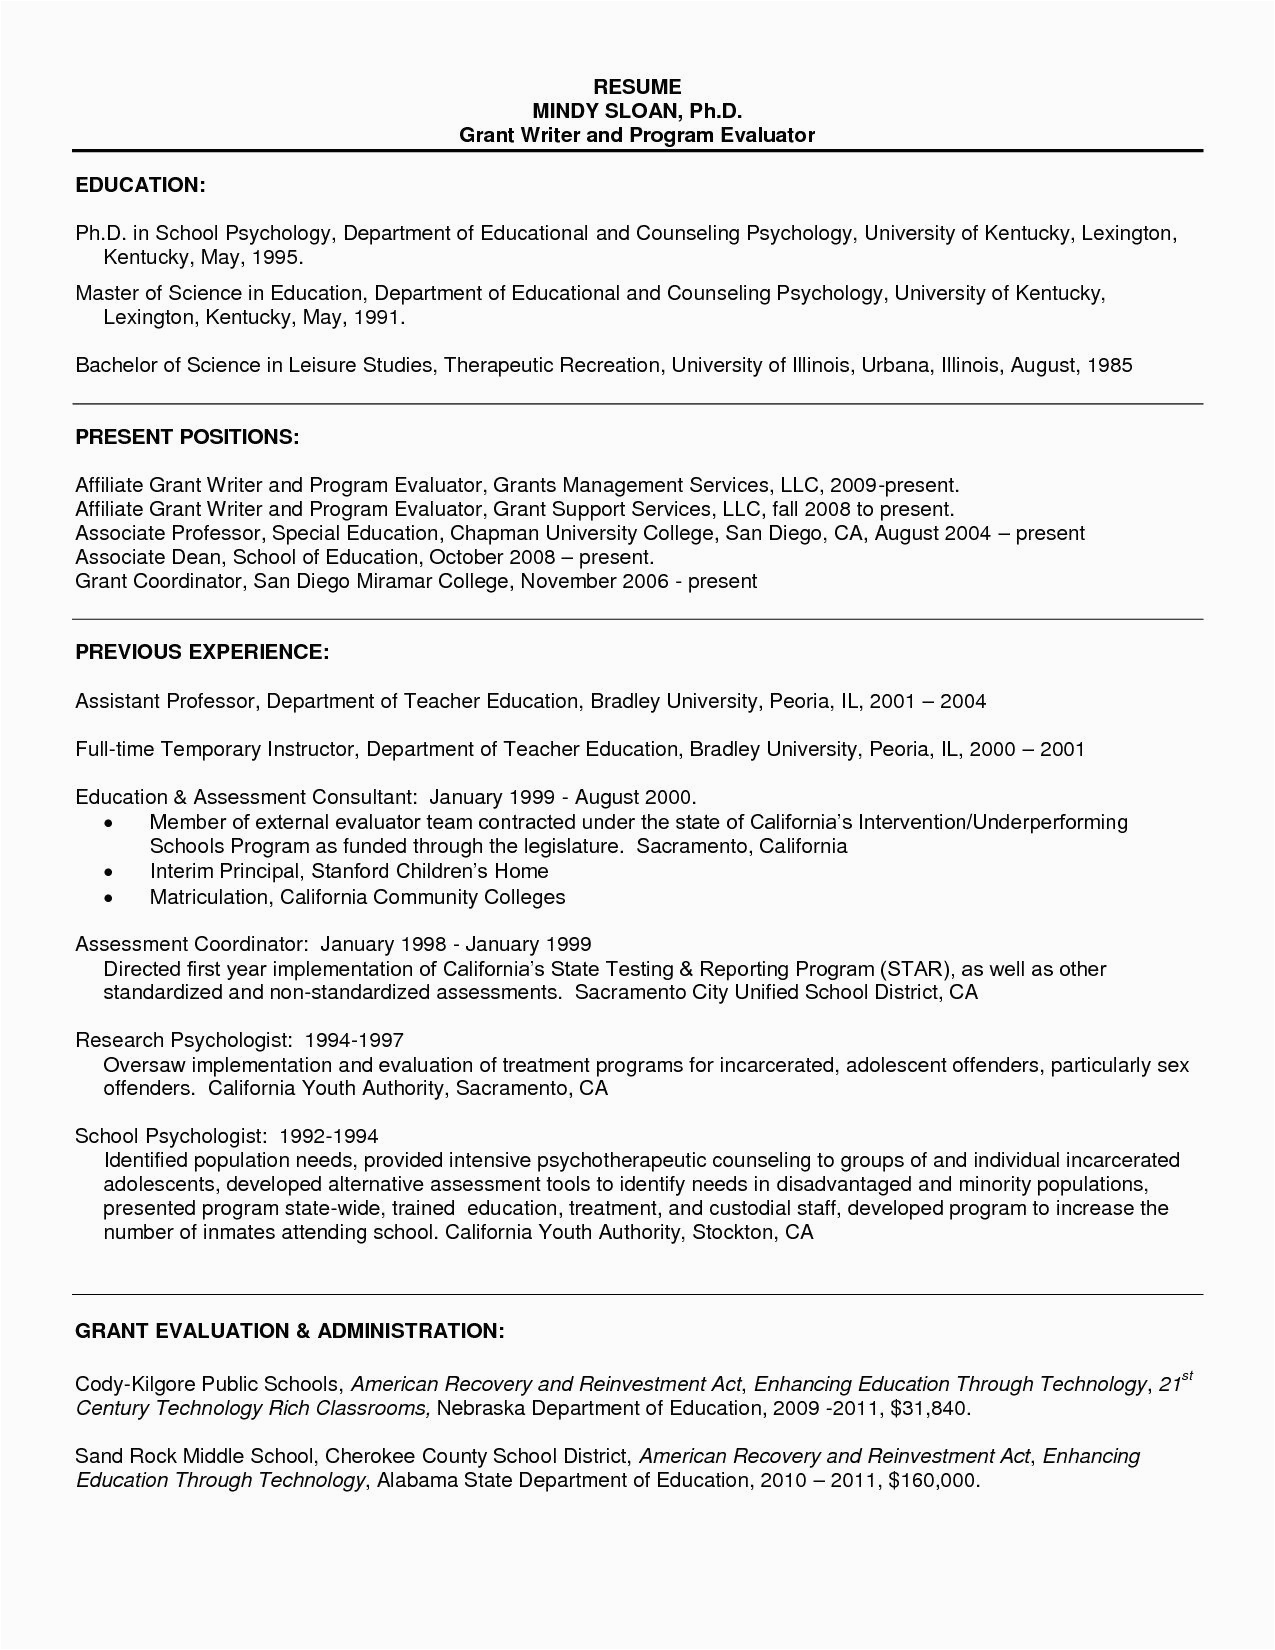 Sample Resume with Bachelors and Masters Degrees Resume Sample for Psychology Graduate Free Resume Templates